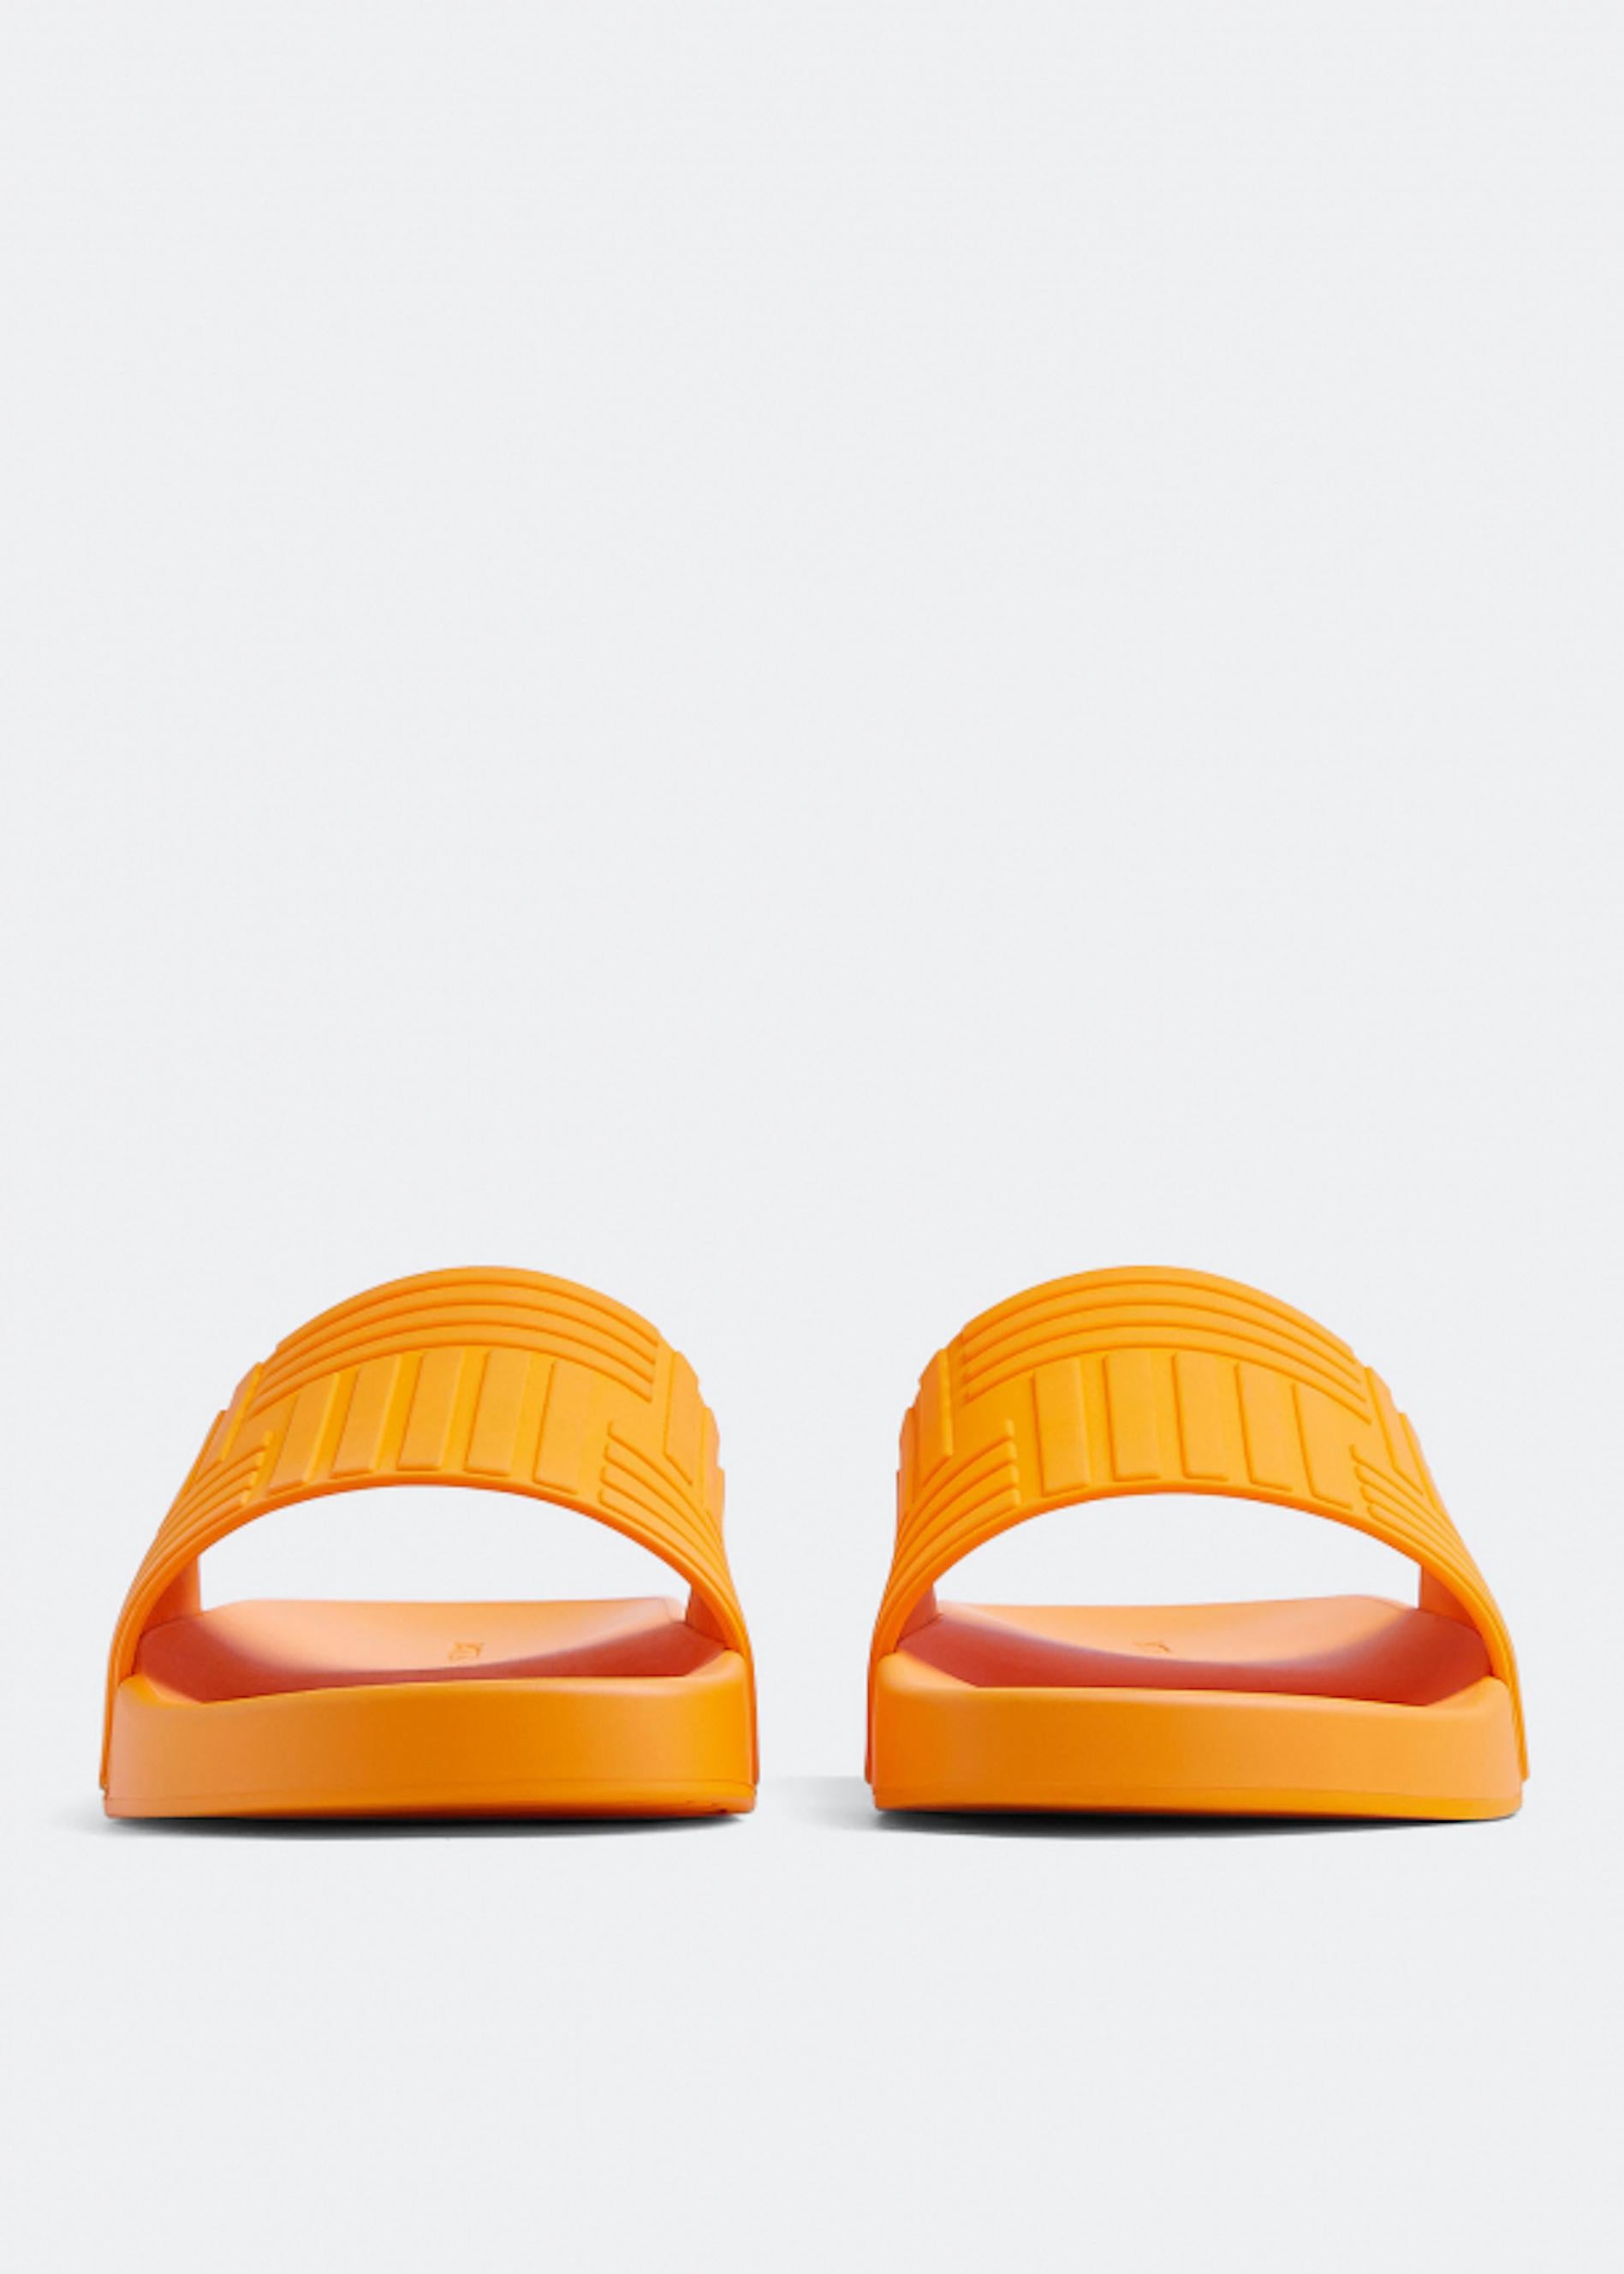 These Bottega Veneta Rubber slides will be your best companion this summer as you relax and enjoy the beach and pool. Constructed in rubber with a broad upper band, they make any outfit fun with their pop color hue. Brand new, never worn, in all